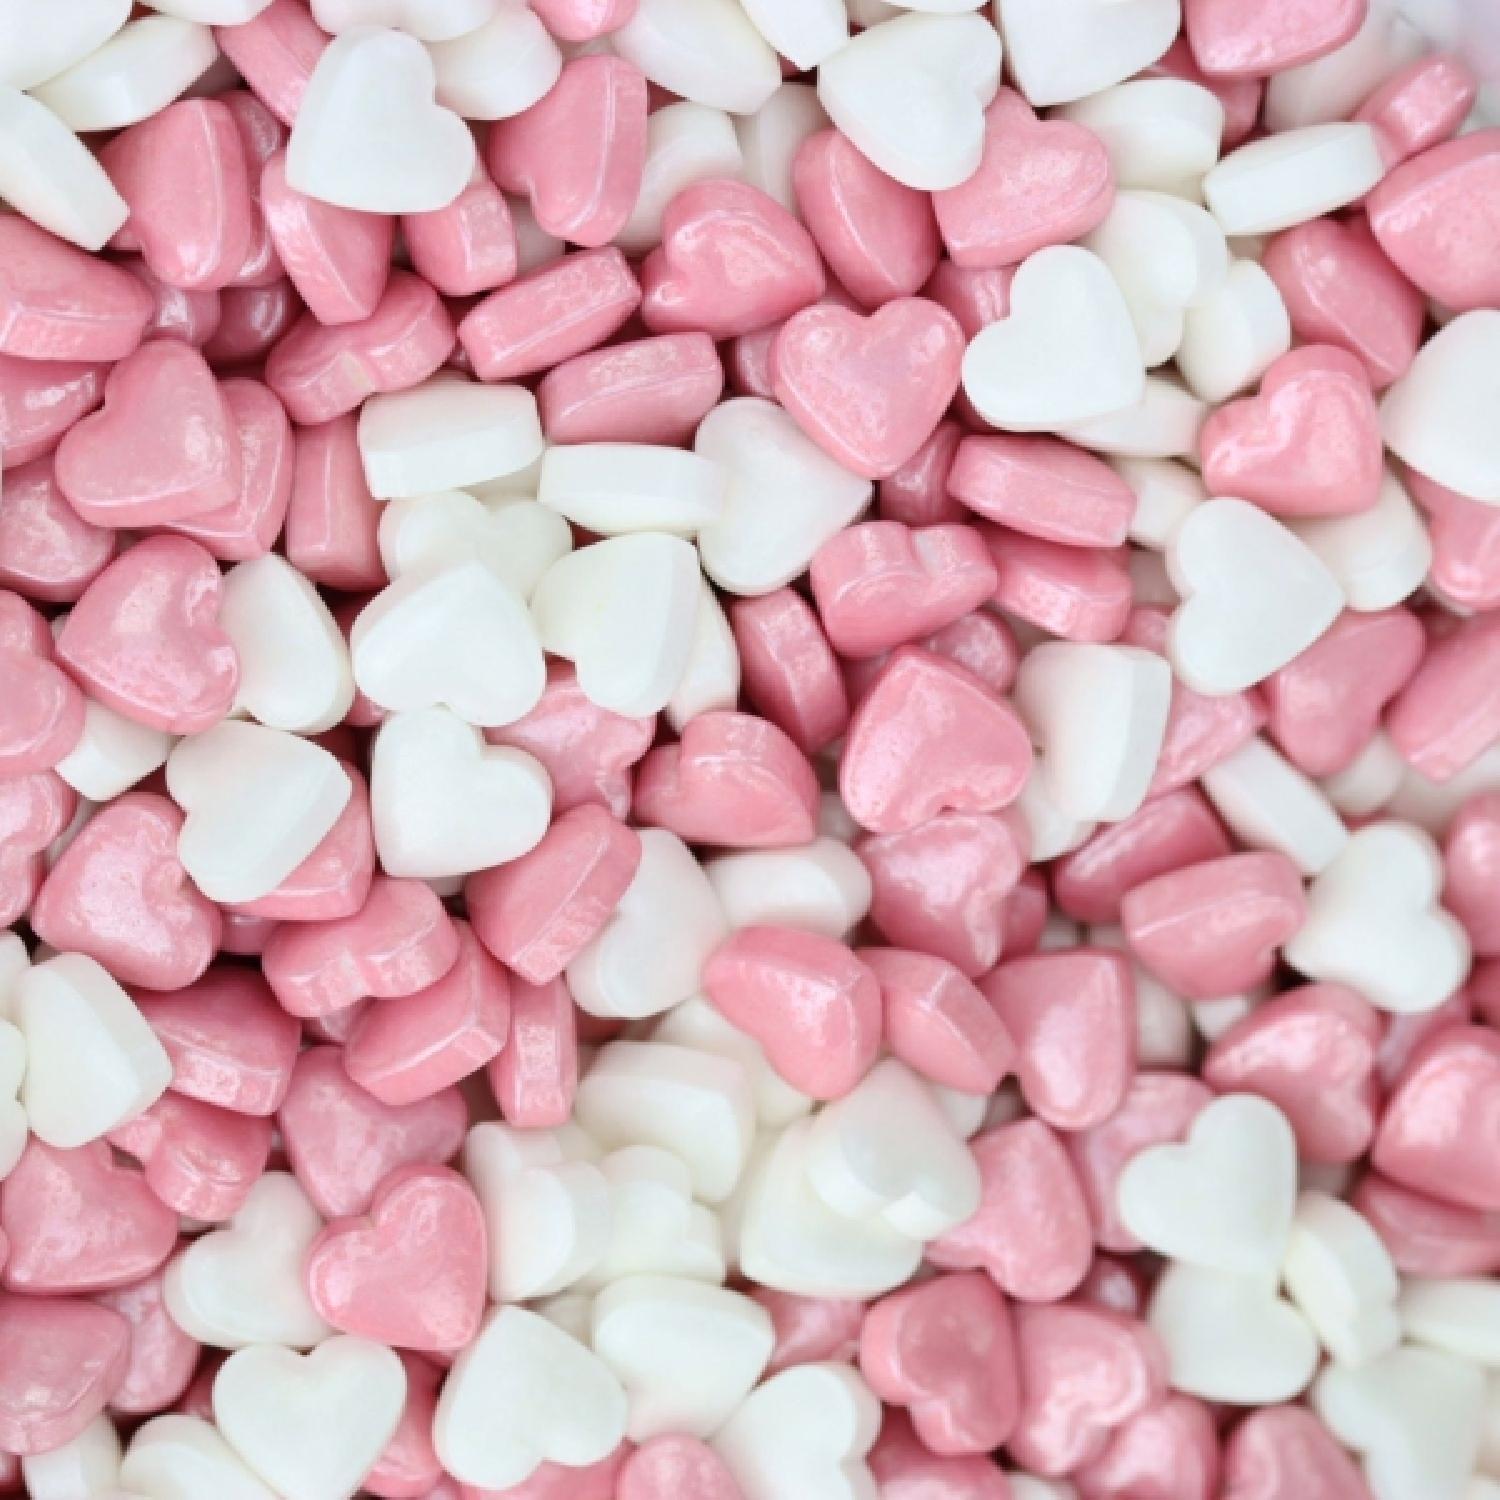 PINK AND WHITE HEART SHAPE SUGAR PEARLS 4MM 15GMS